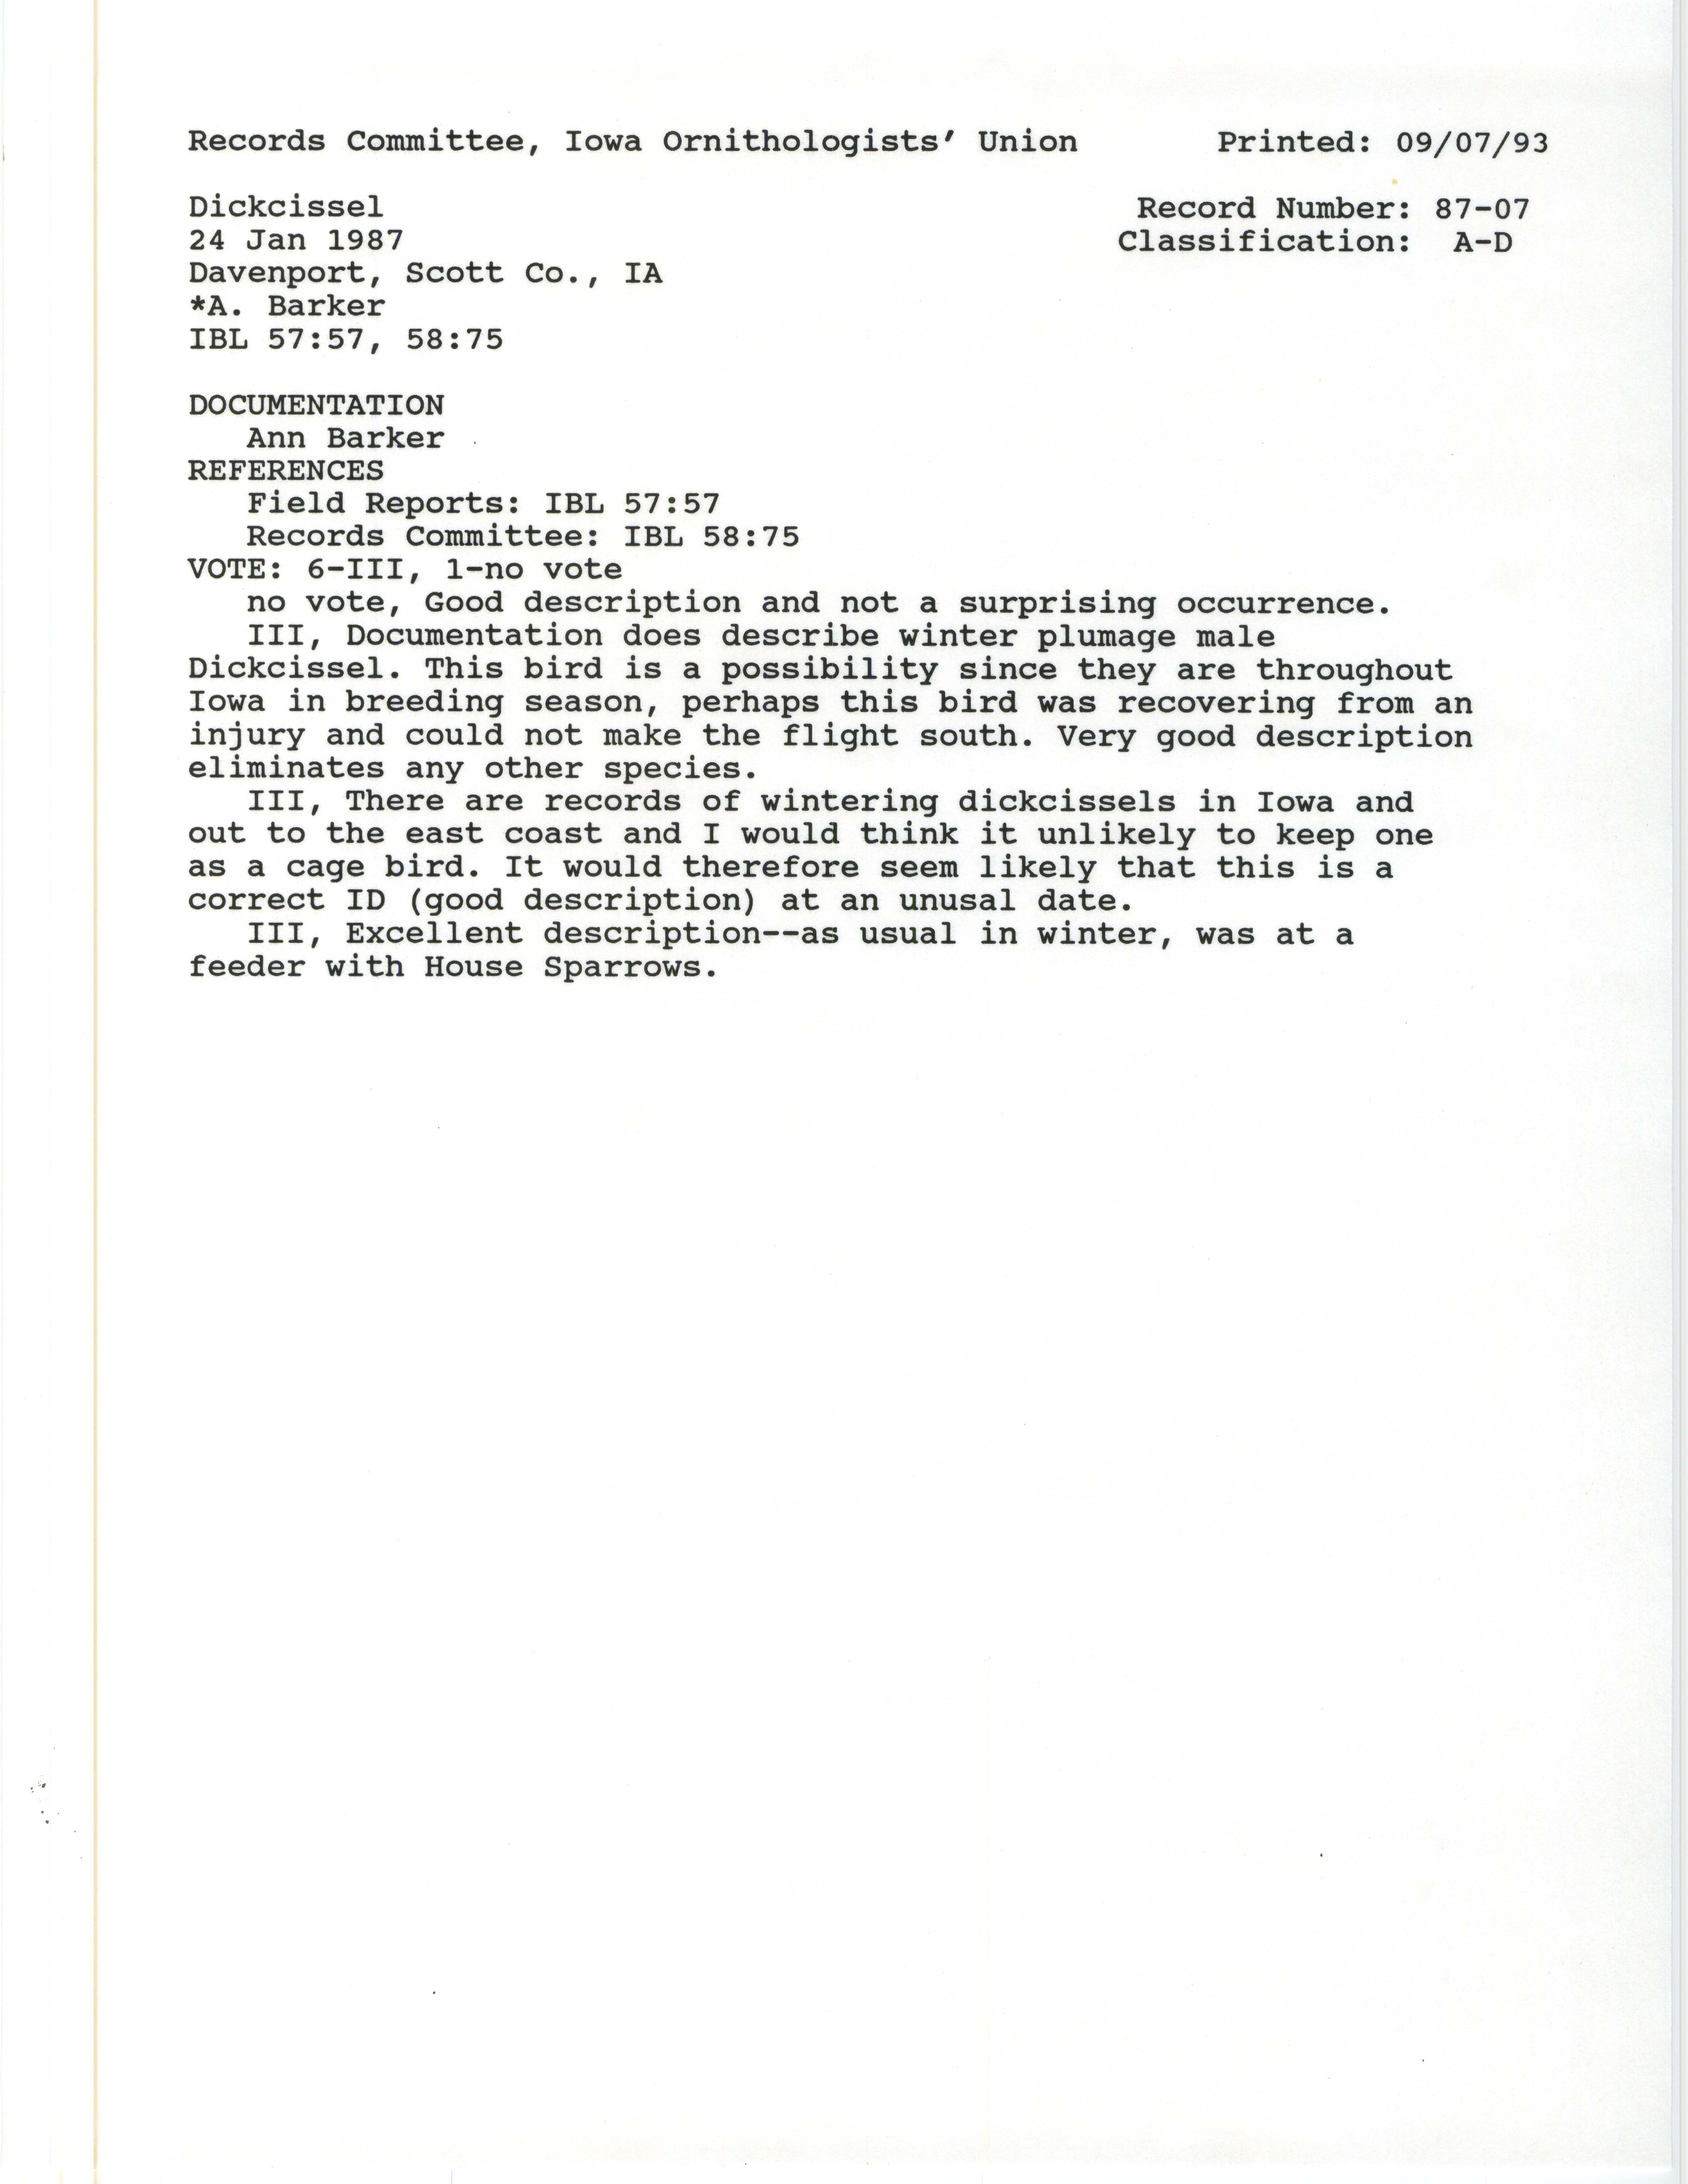 Records Committee review for rare bird sighting for Dickcissel at Davenport, 1987